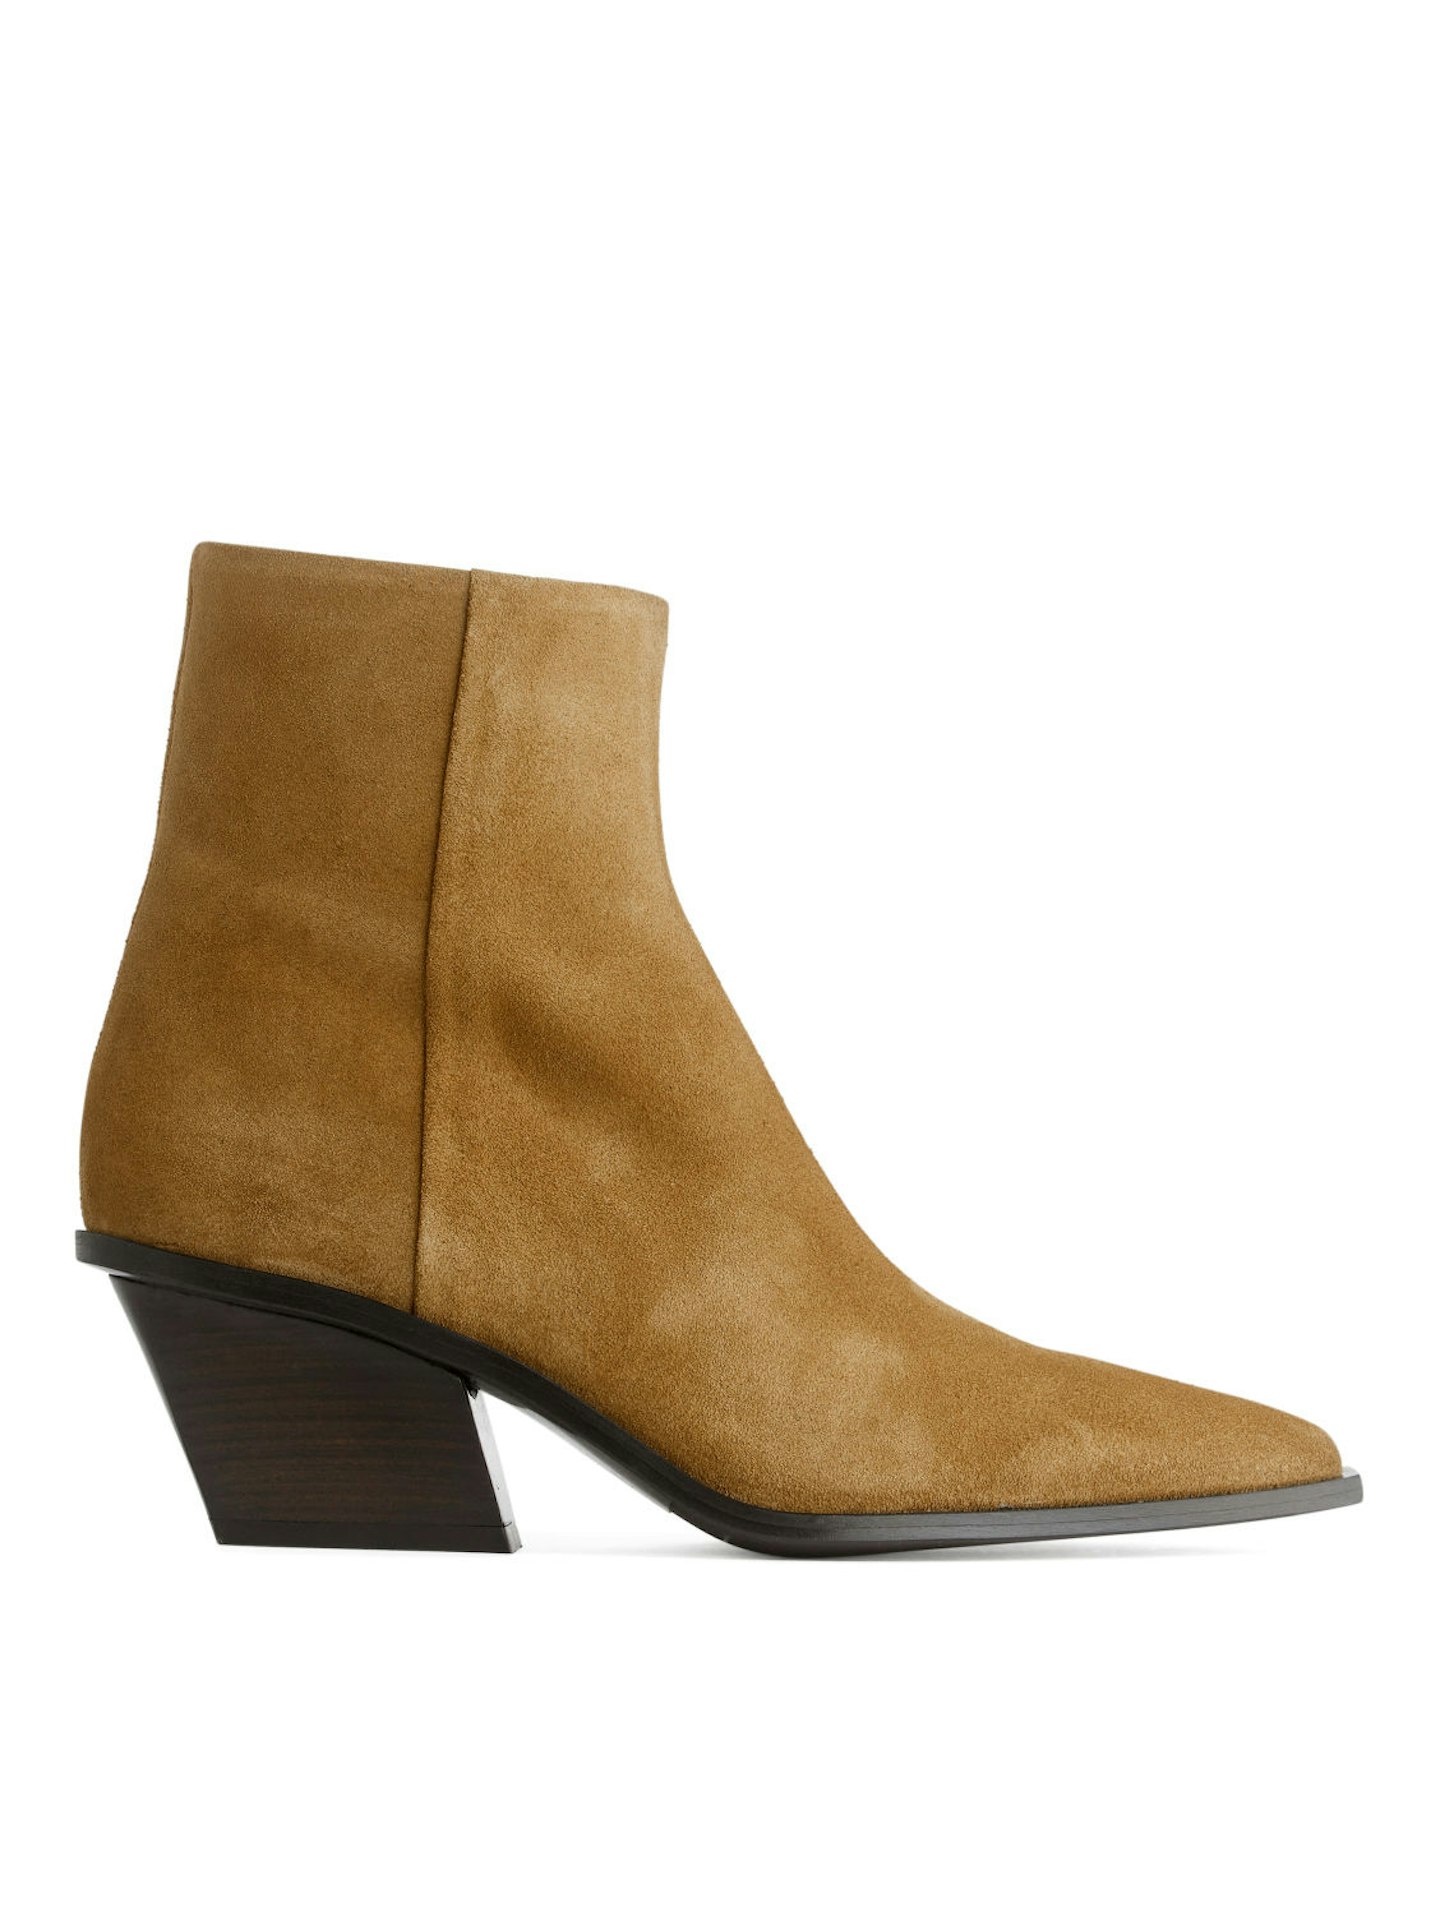 Arket, Suede Ankle Boots